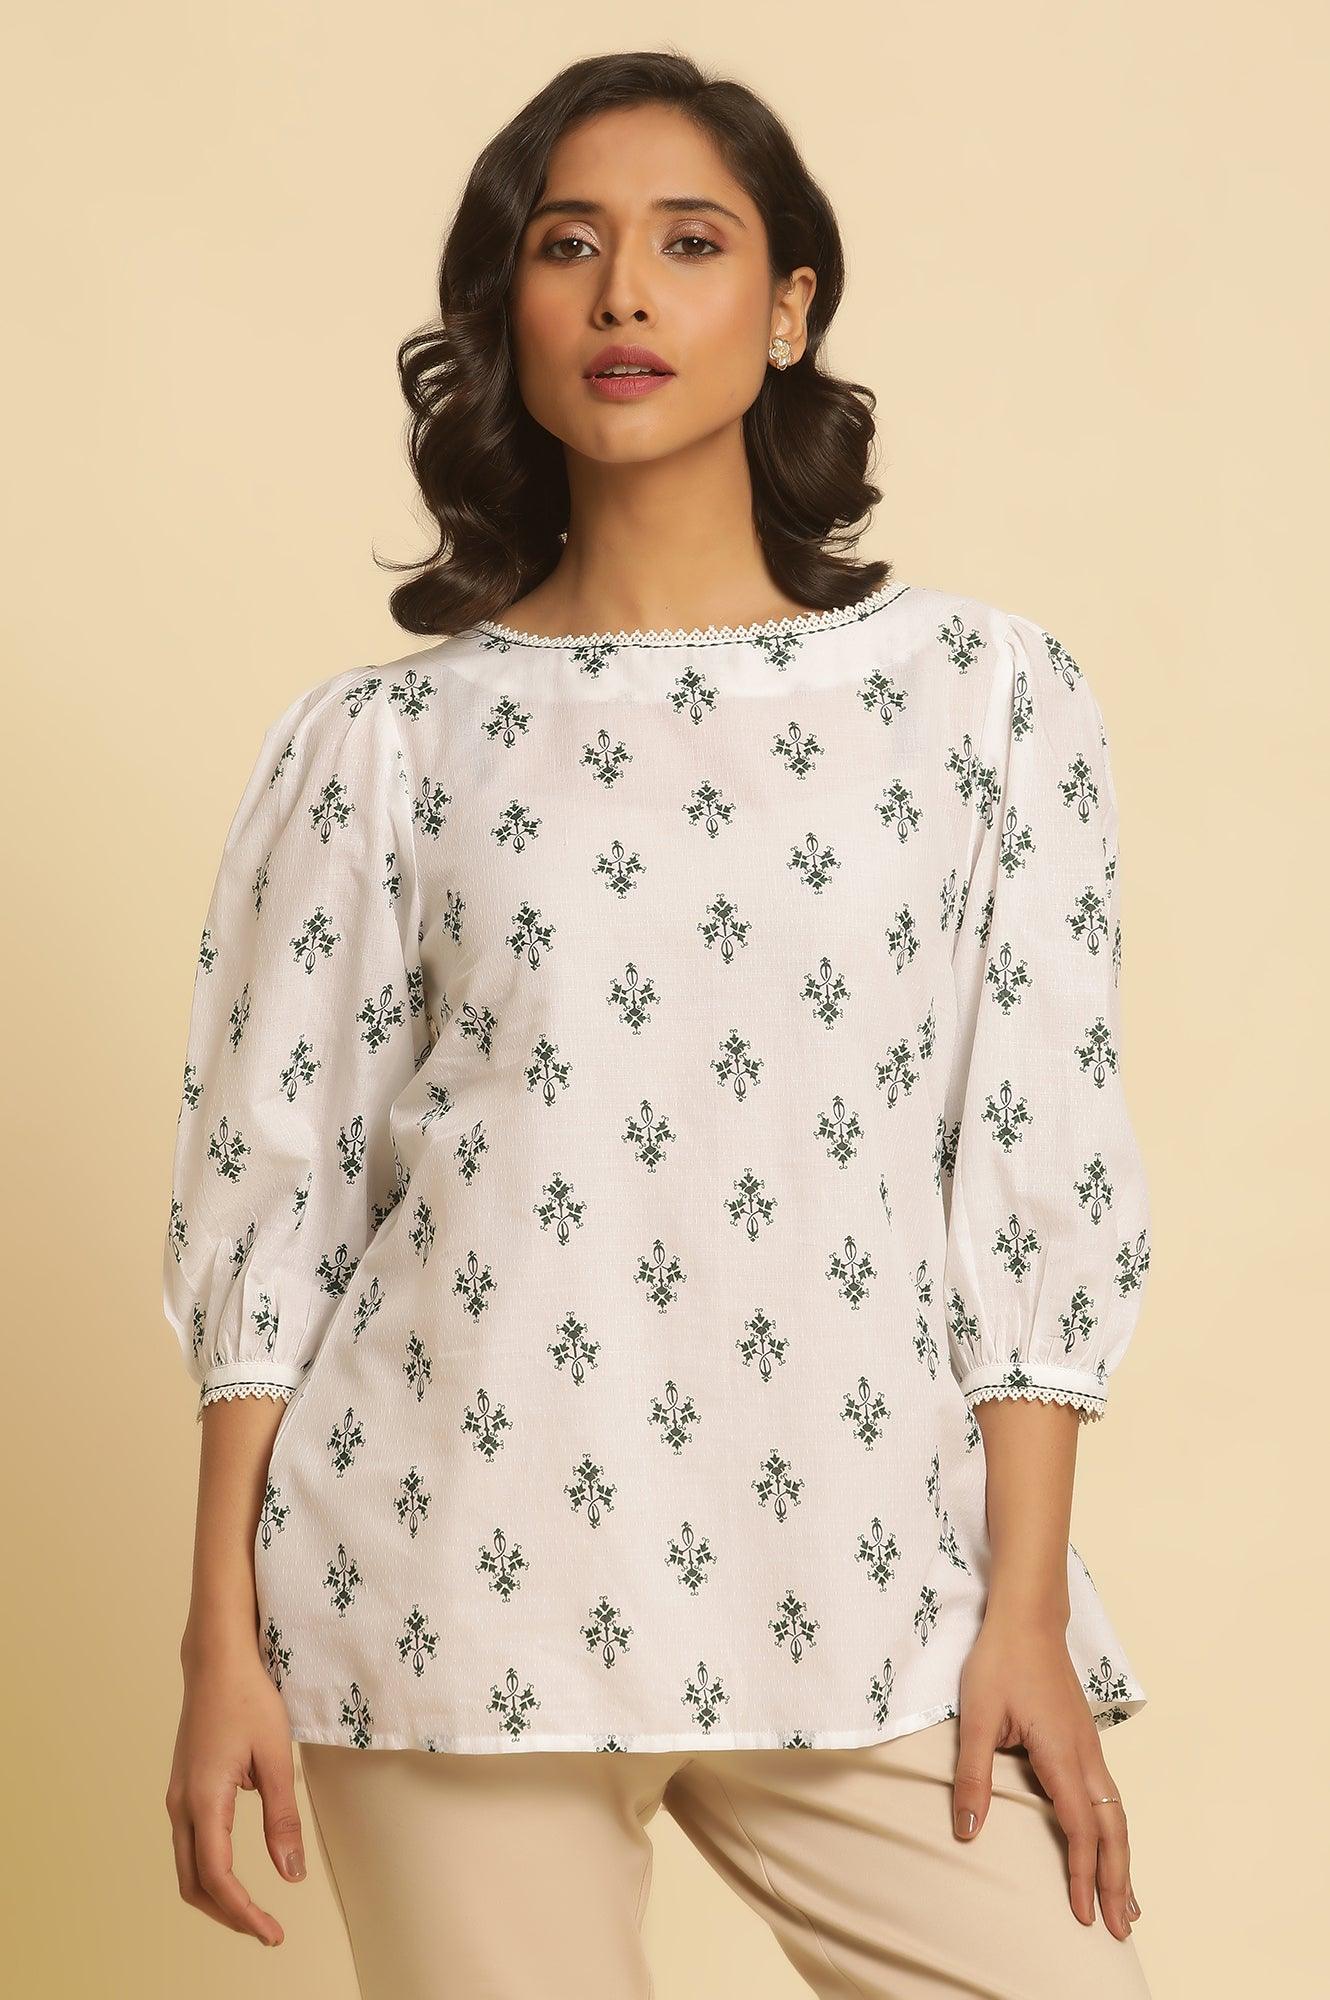 White Printed Top Wit Lace And Puffed Sleeves - wforwoman